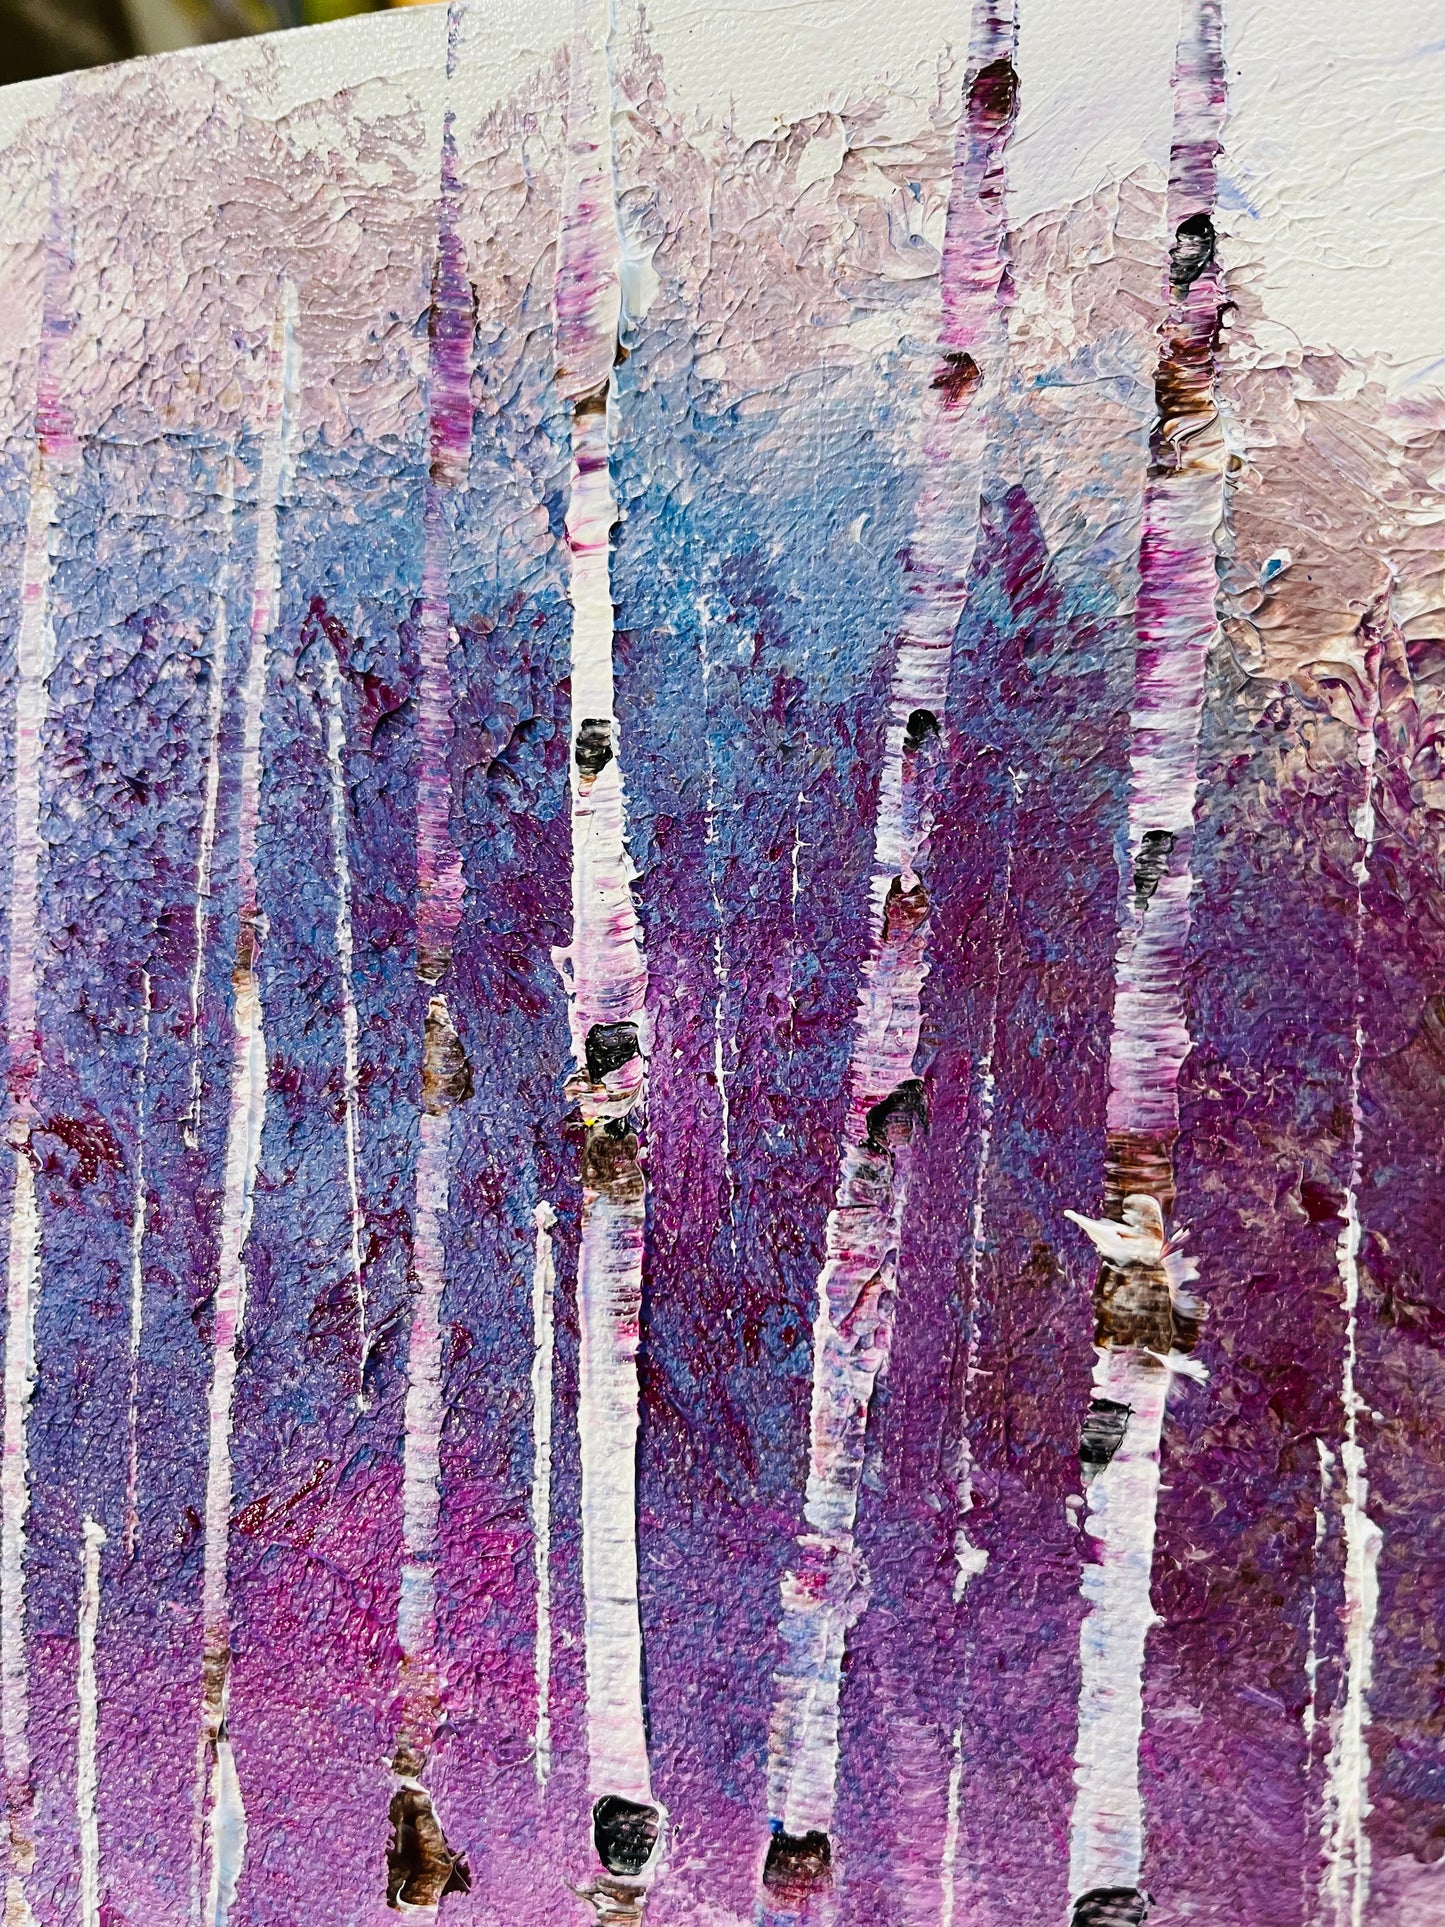 Abstract winter Aspens in purple shades